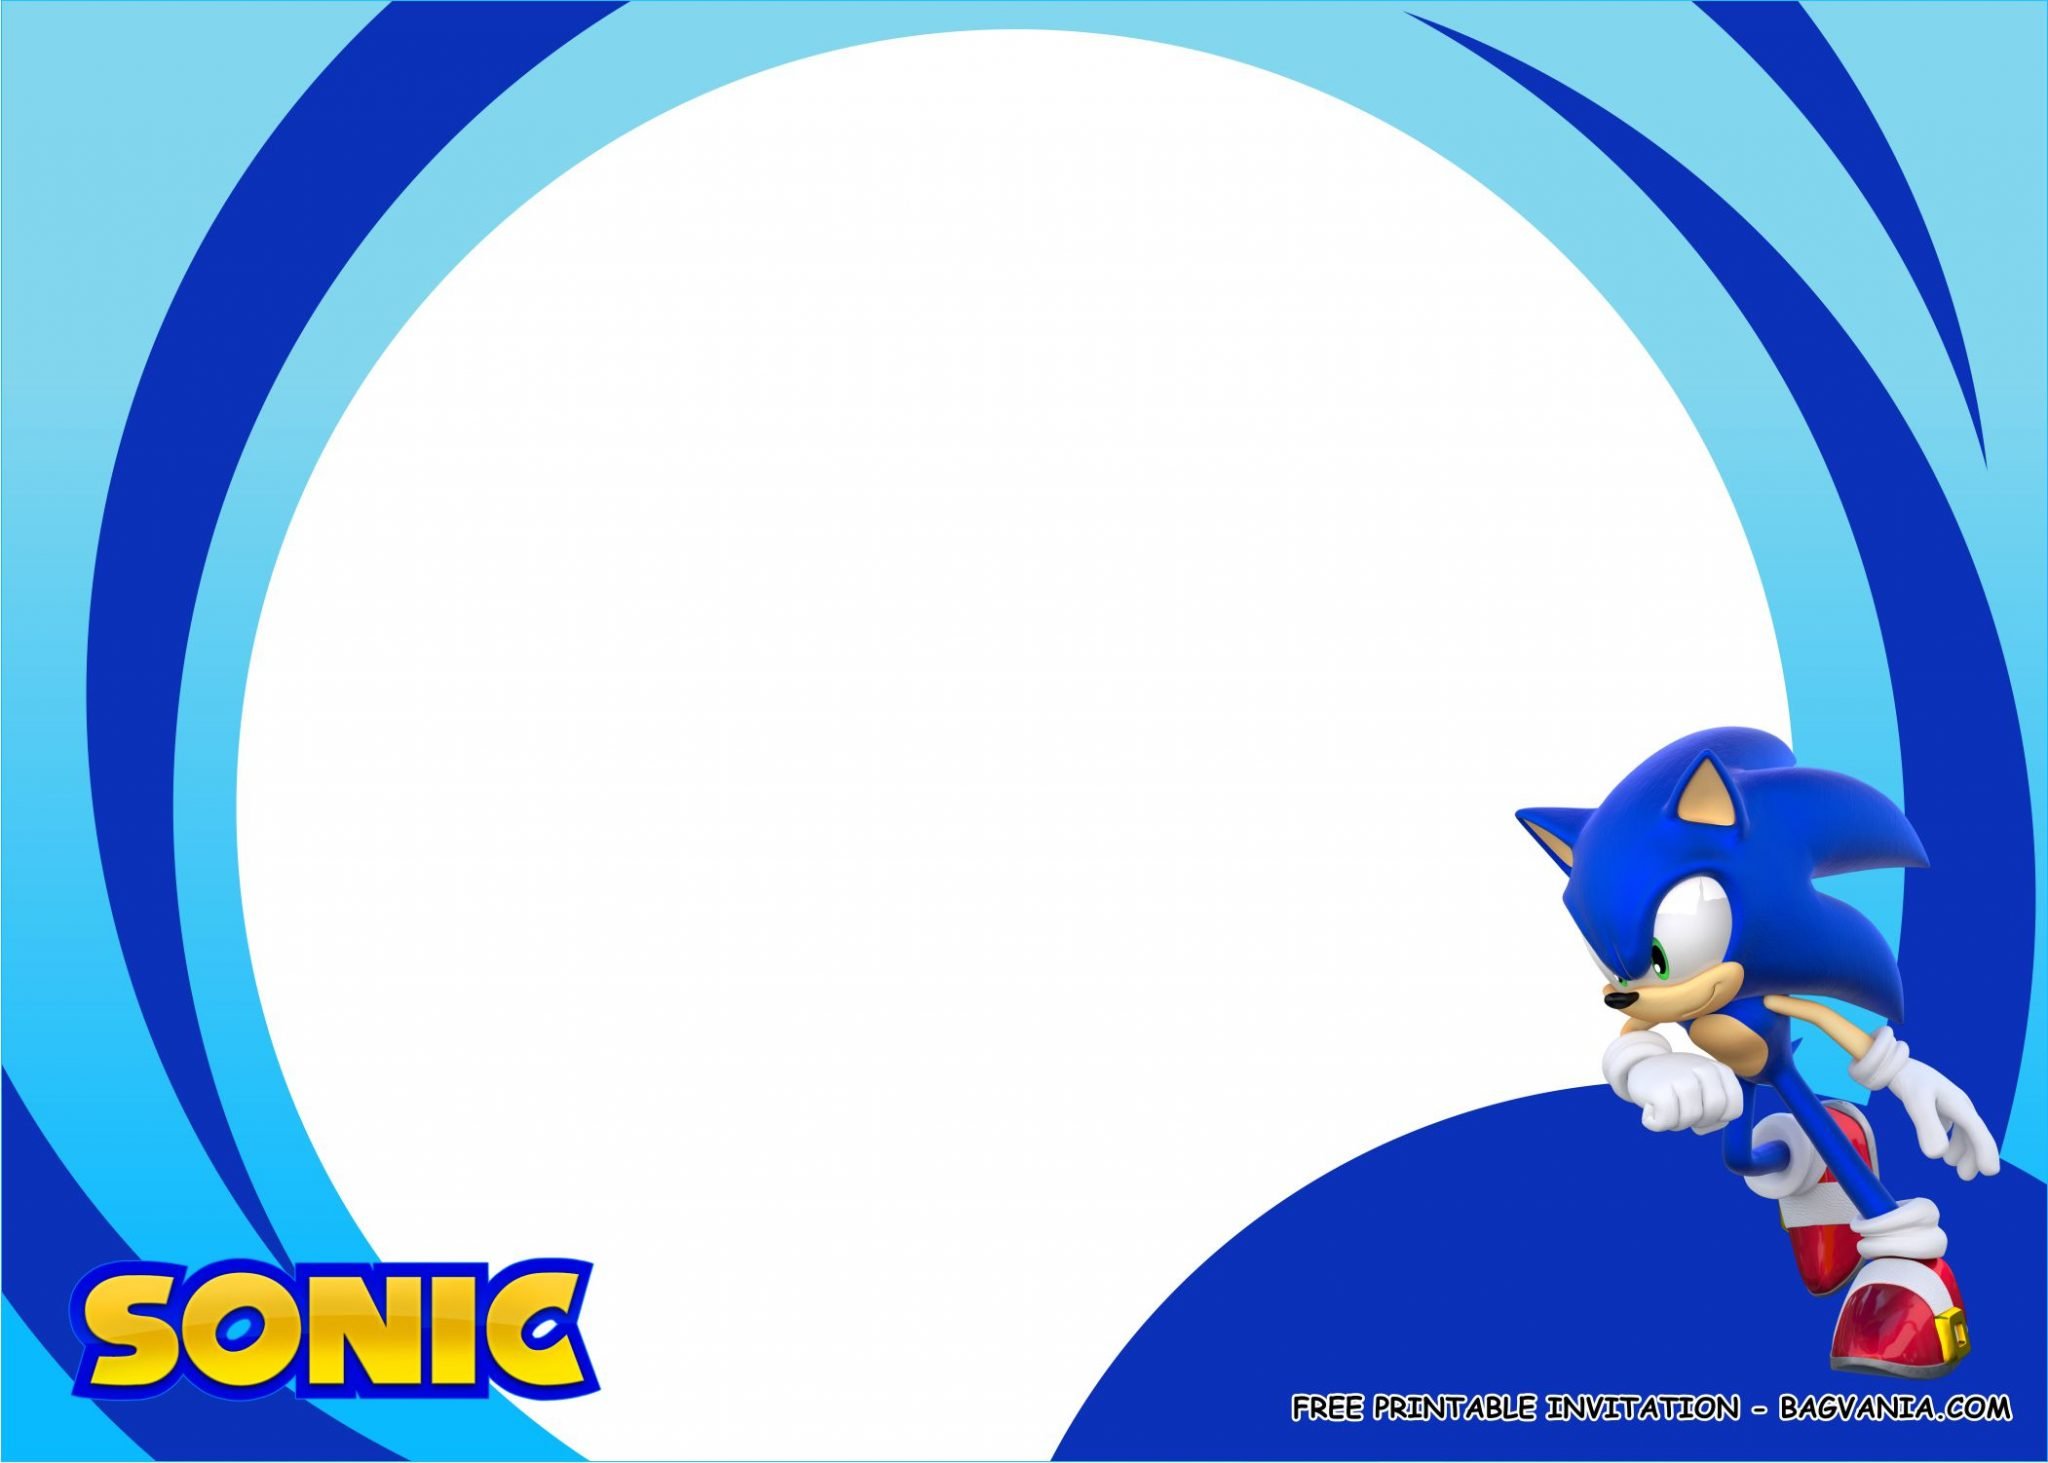 (FREE PRINTABLE) Sonic the Hedgehog Birthday Party Kits Template